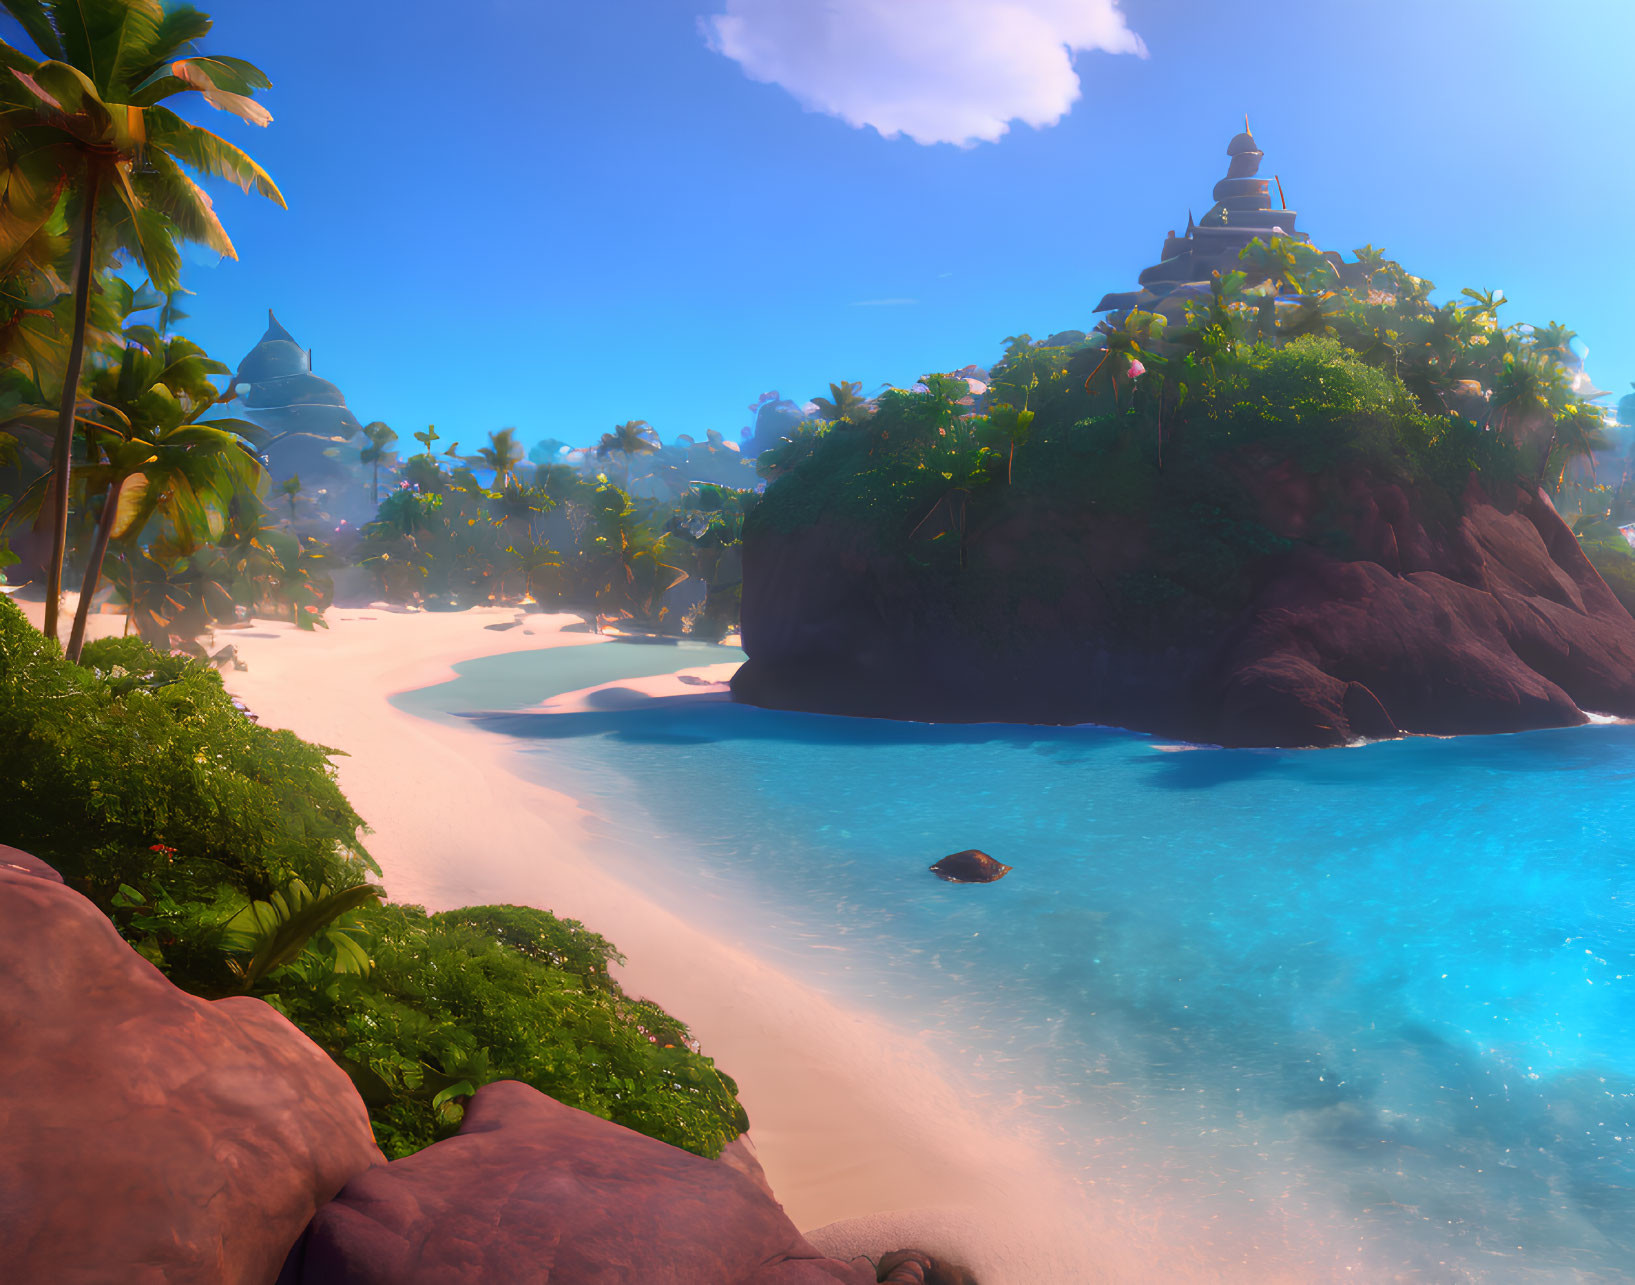 Tropical beach with crystal-clear water, palm trees, rocky landscape, and hilltop temple